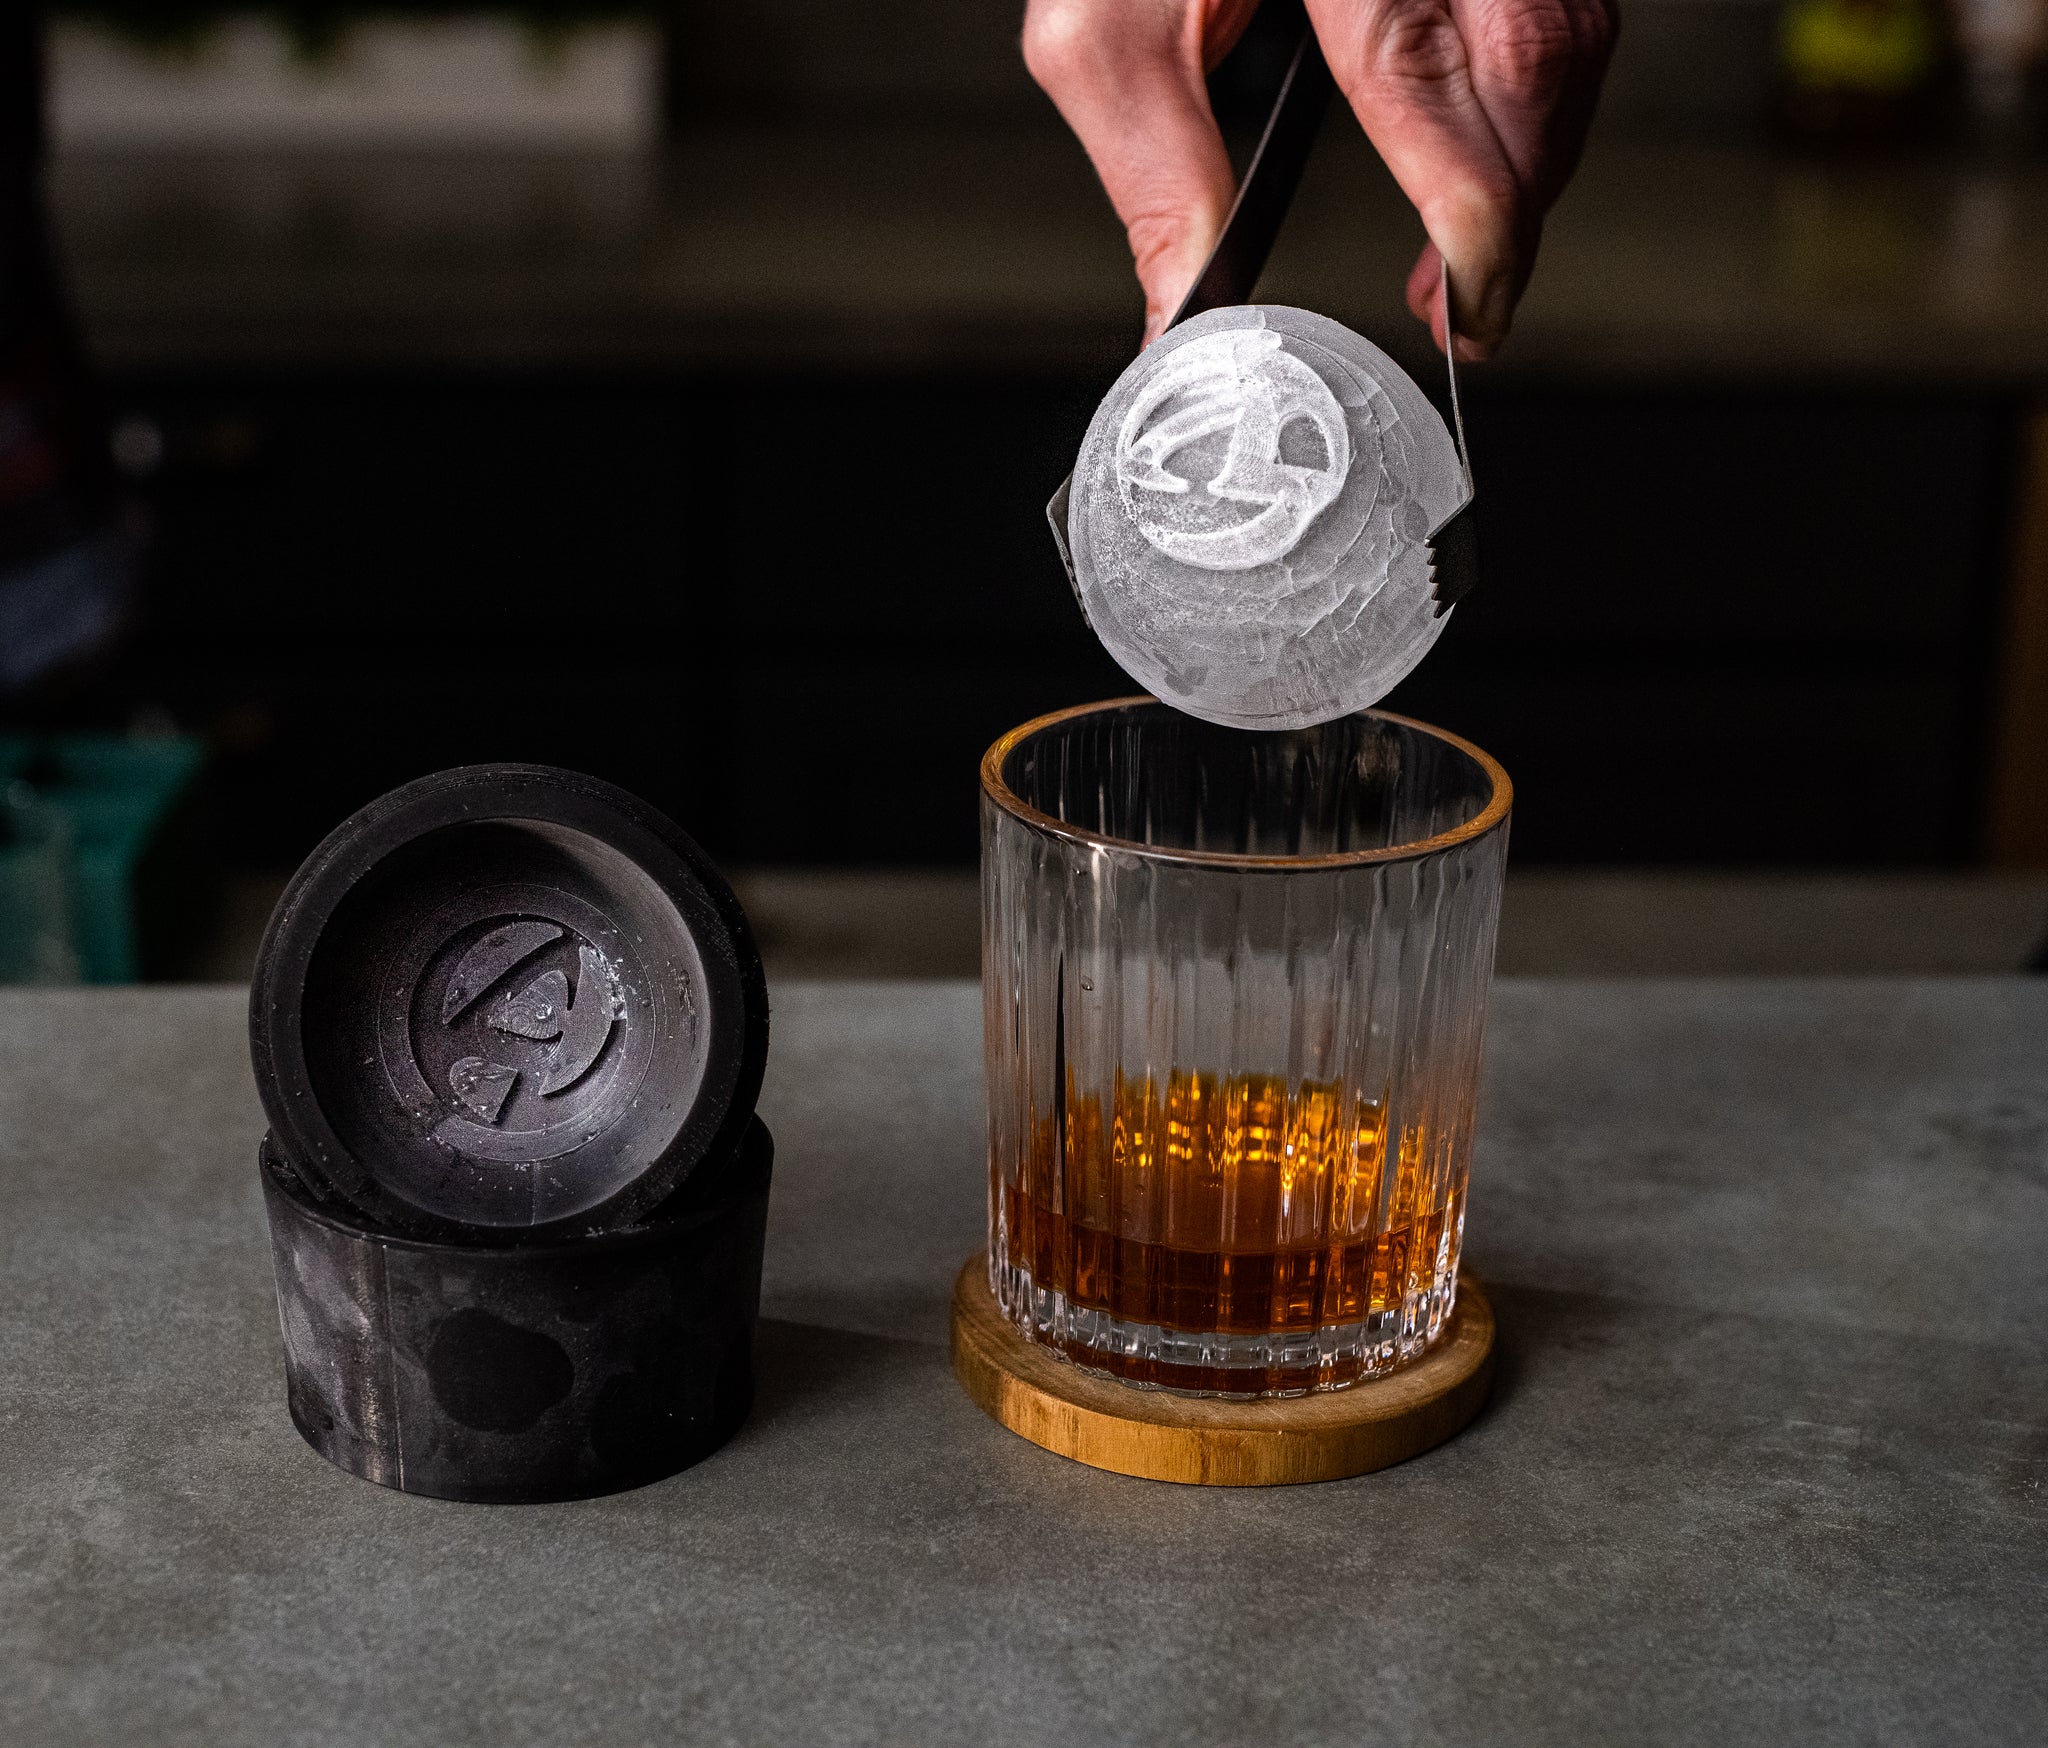 Premium Round Ice Cube Mold - Crystal Clear Whiskey Ice Ball Maker Mold -  Craft Big Sphere Ice Cube Tray - Circle Ice Cubes Trays for Bourbon - Large